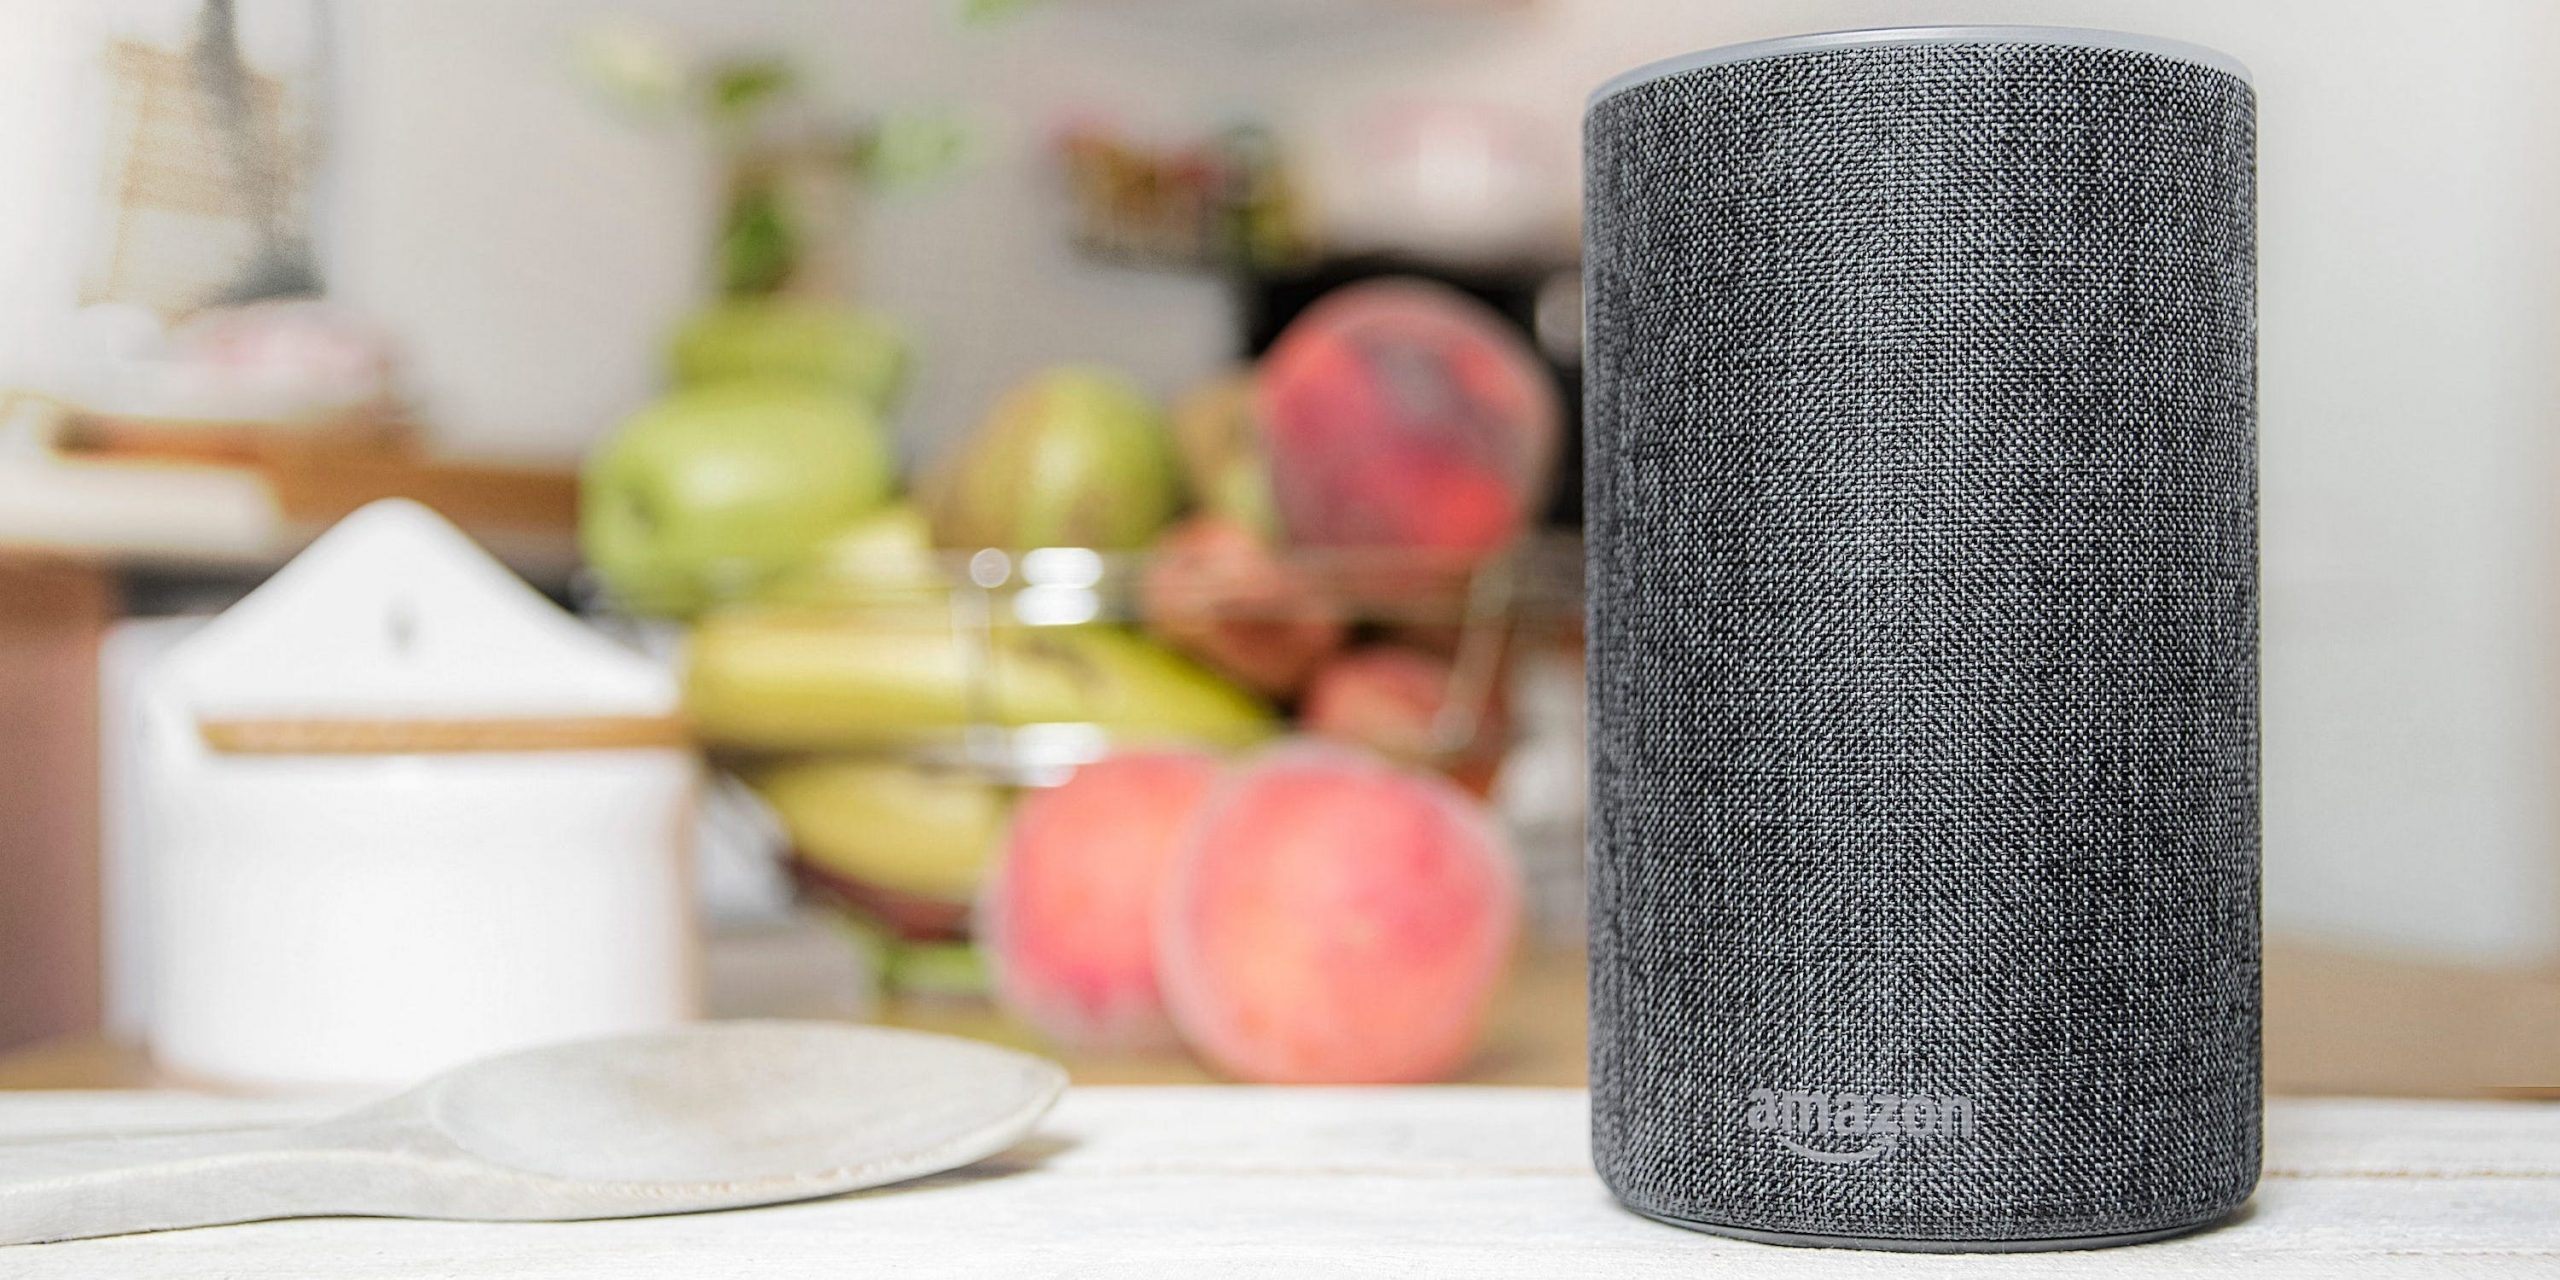 An Amazon Echo in a kitchen, sitting next to fruit and spoons.